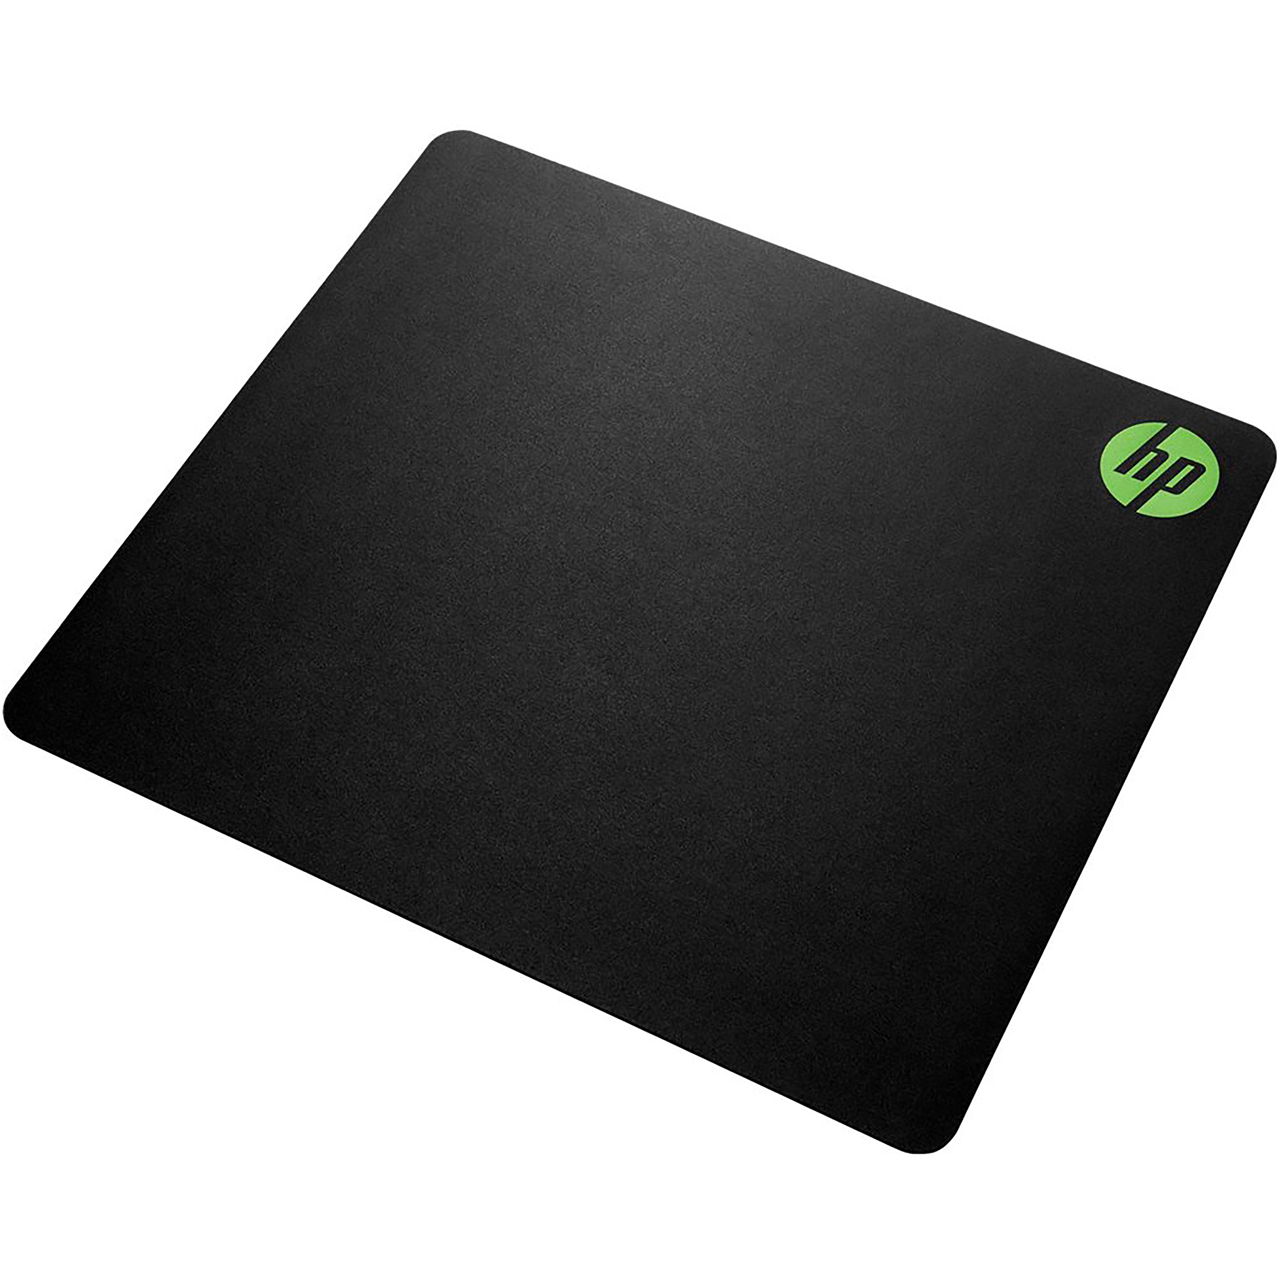 HP Pavilion 300 Gaming Mouse Pad Review